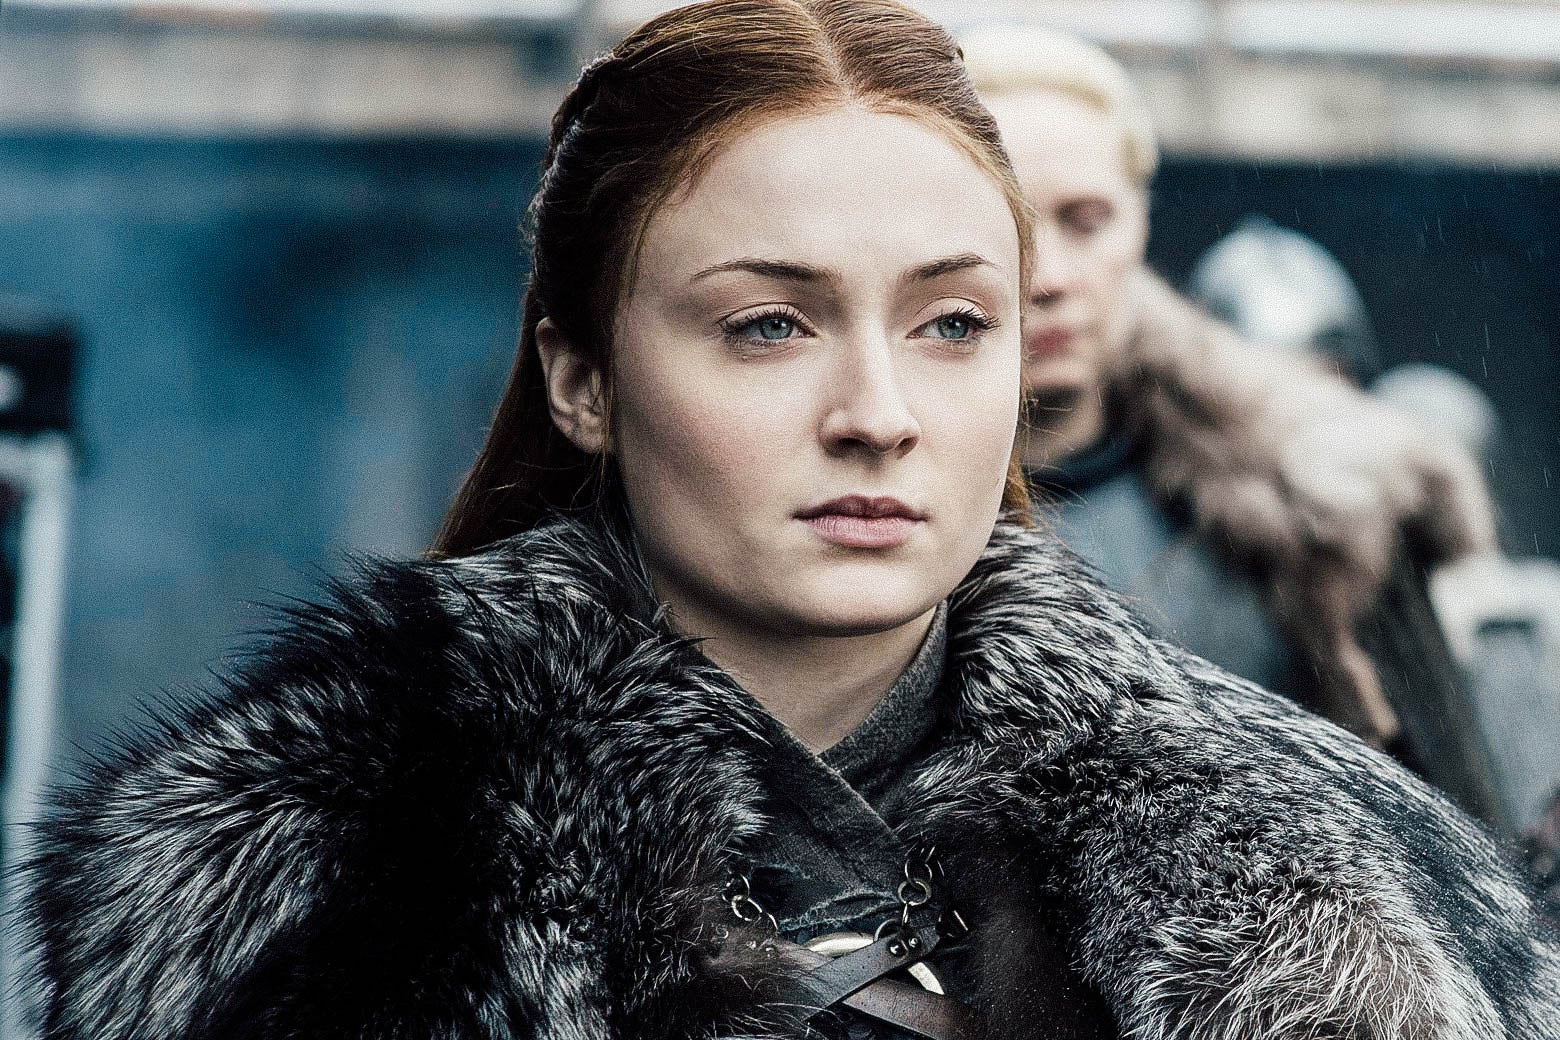 Sophie Turner as Sansa Stark stands while wearing a fur coat in this still from Game of Thrones.